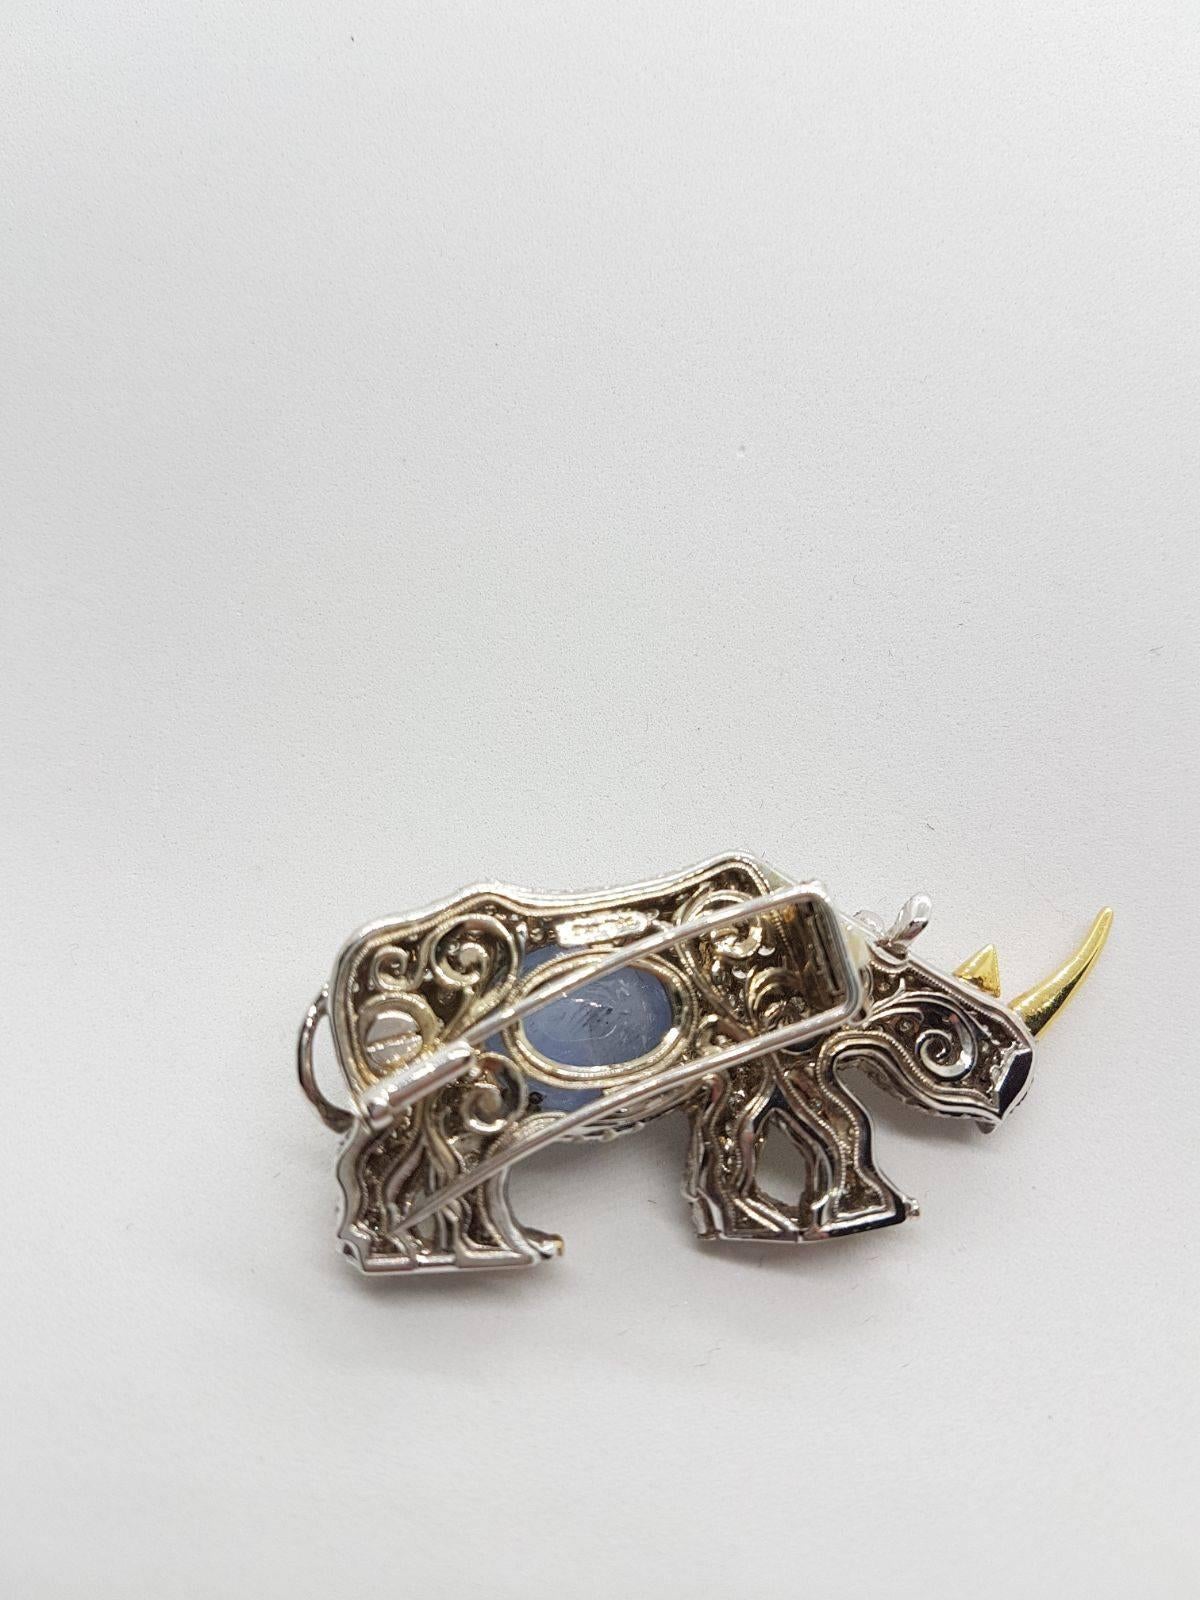 Rhinoceros Broach in White and Yellow Gold with Diamonds and a Sapphire Cabochon For Sale 1